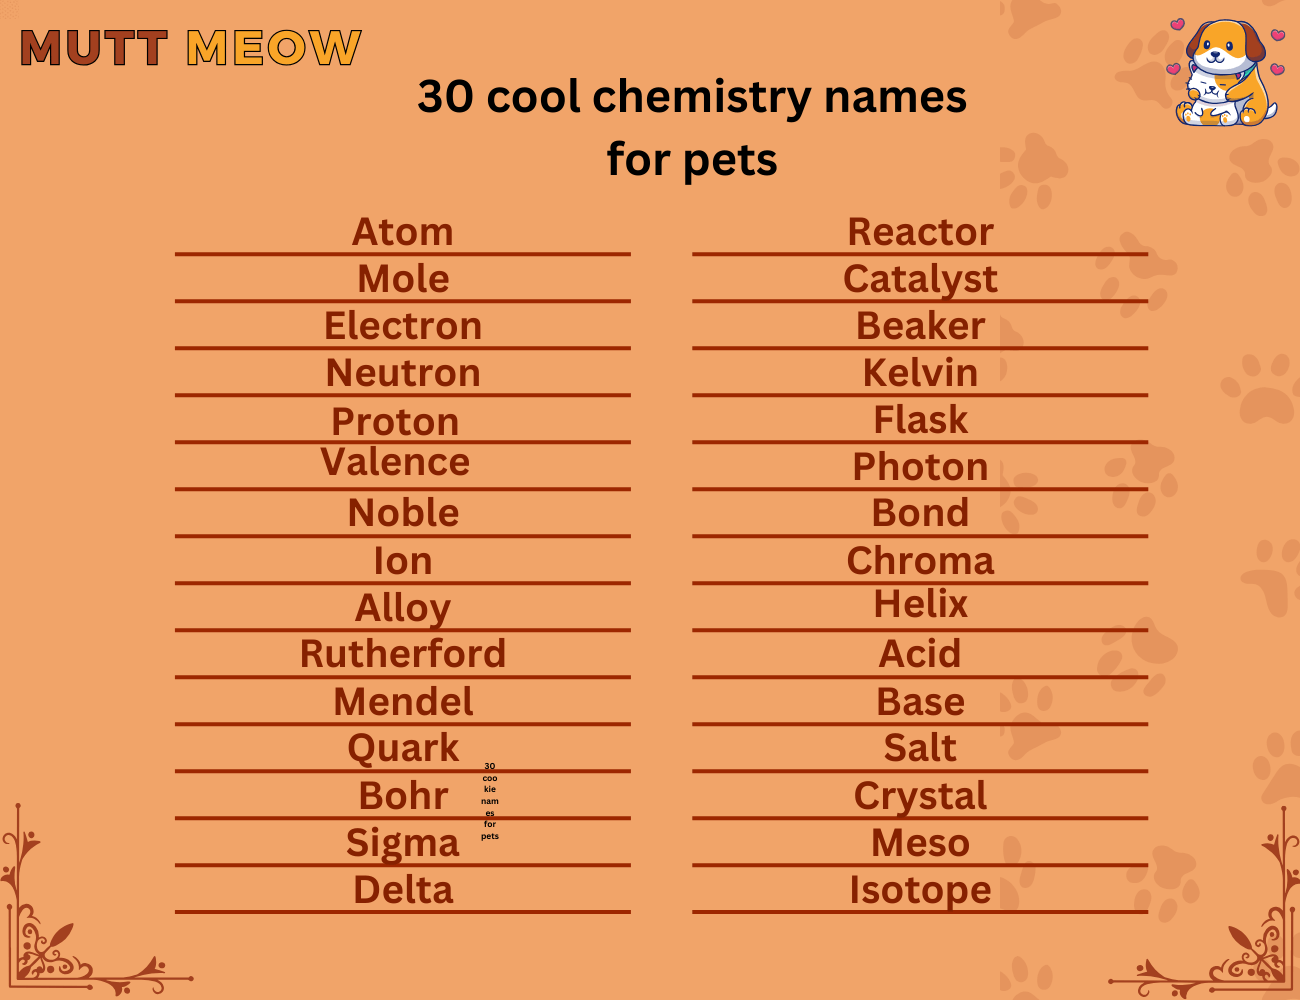 30 cool chemistry names for pets